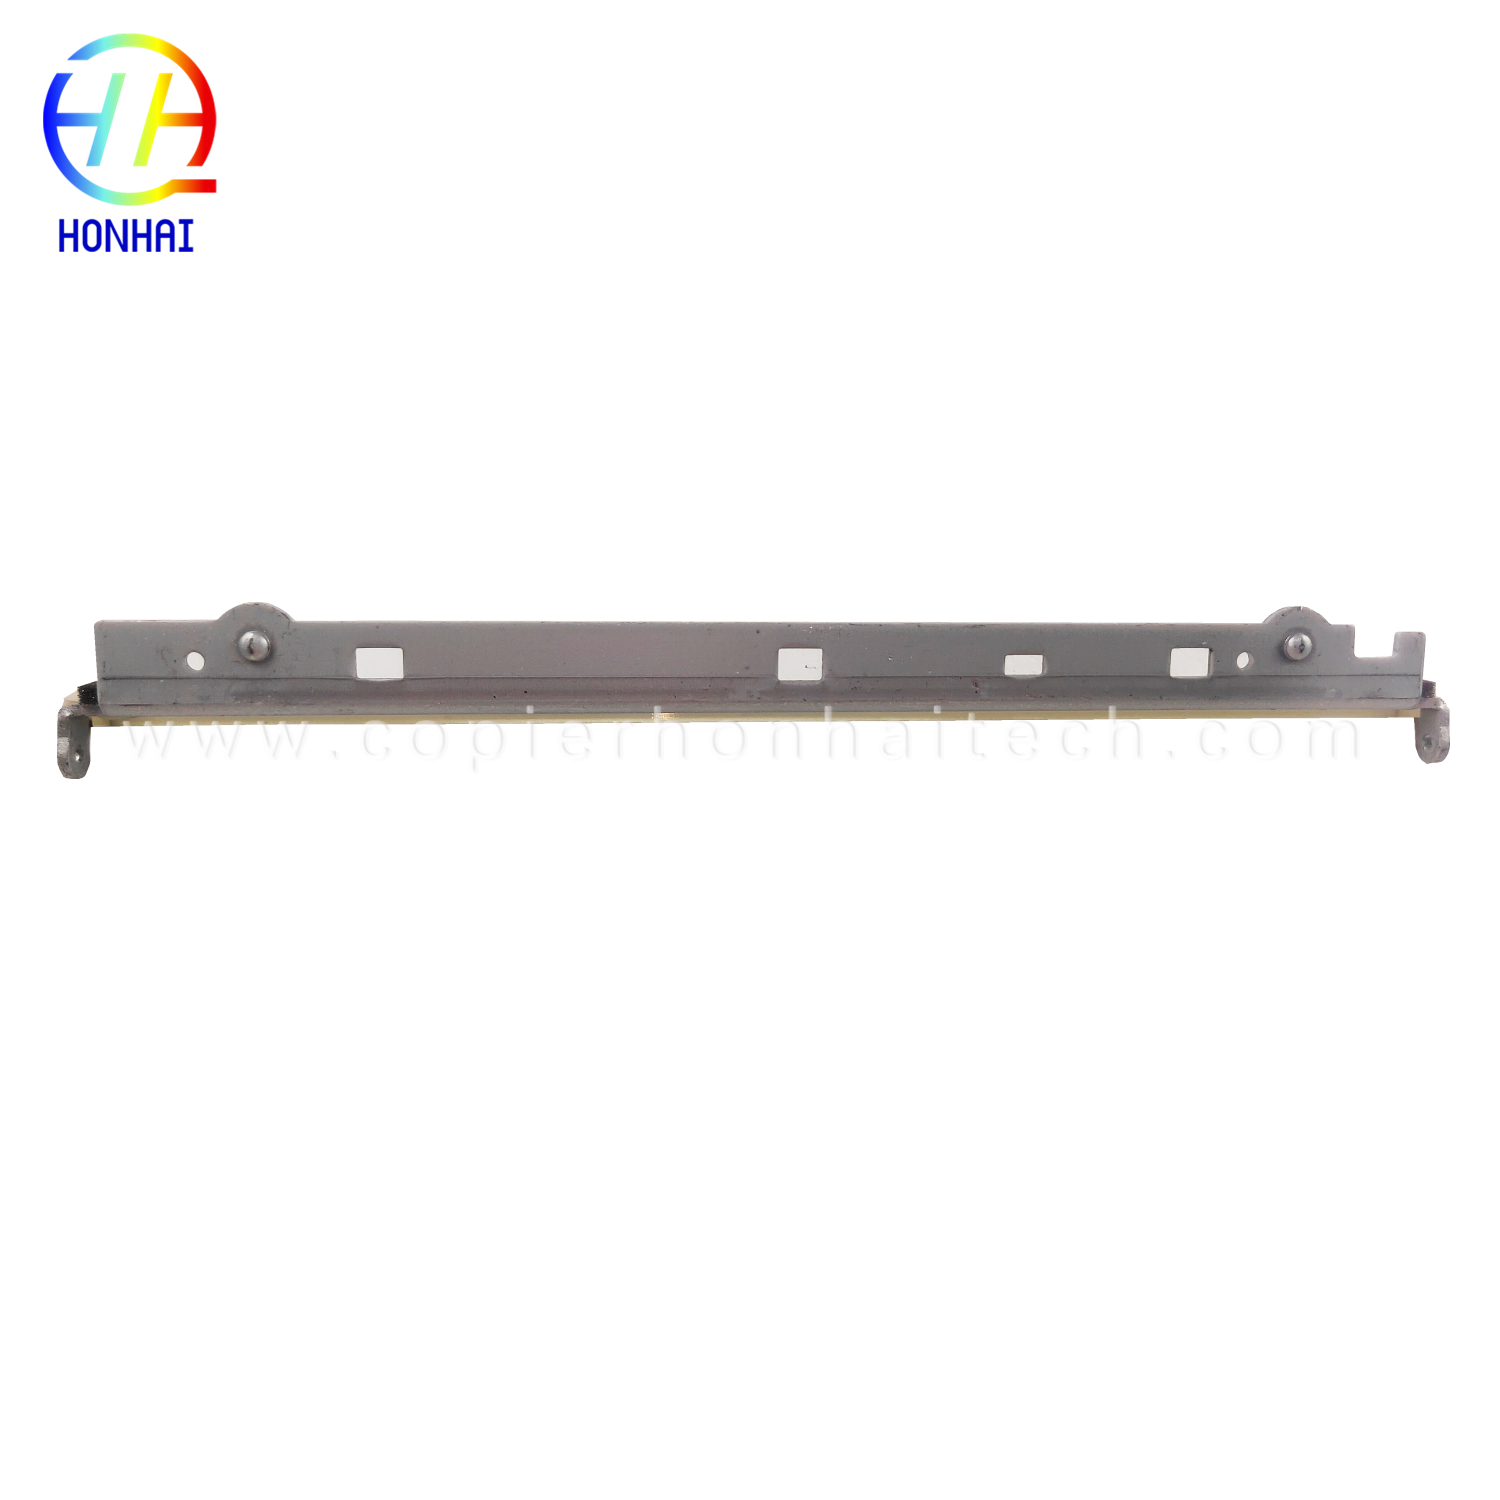 Transfer Belt Cleaning Blade for HP M552 M553 M554 M555 M577 M578 E55040 E57540